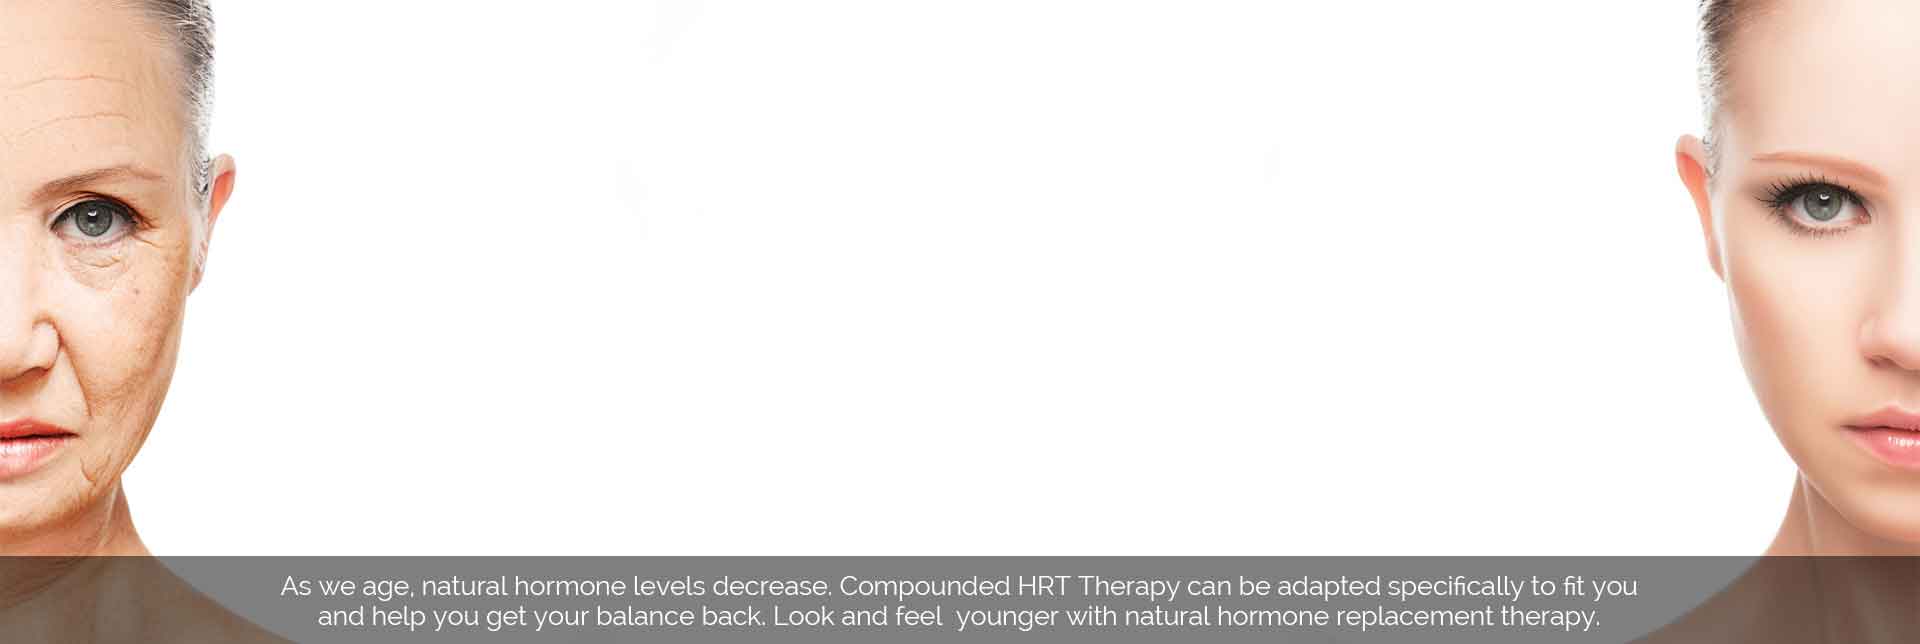 Compounded HRT